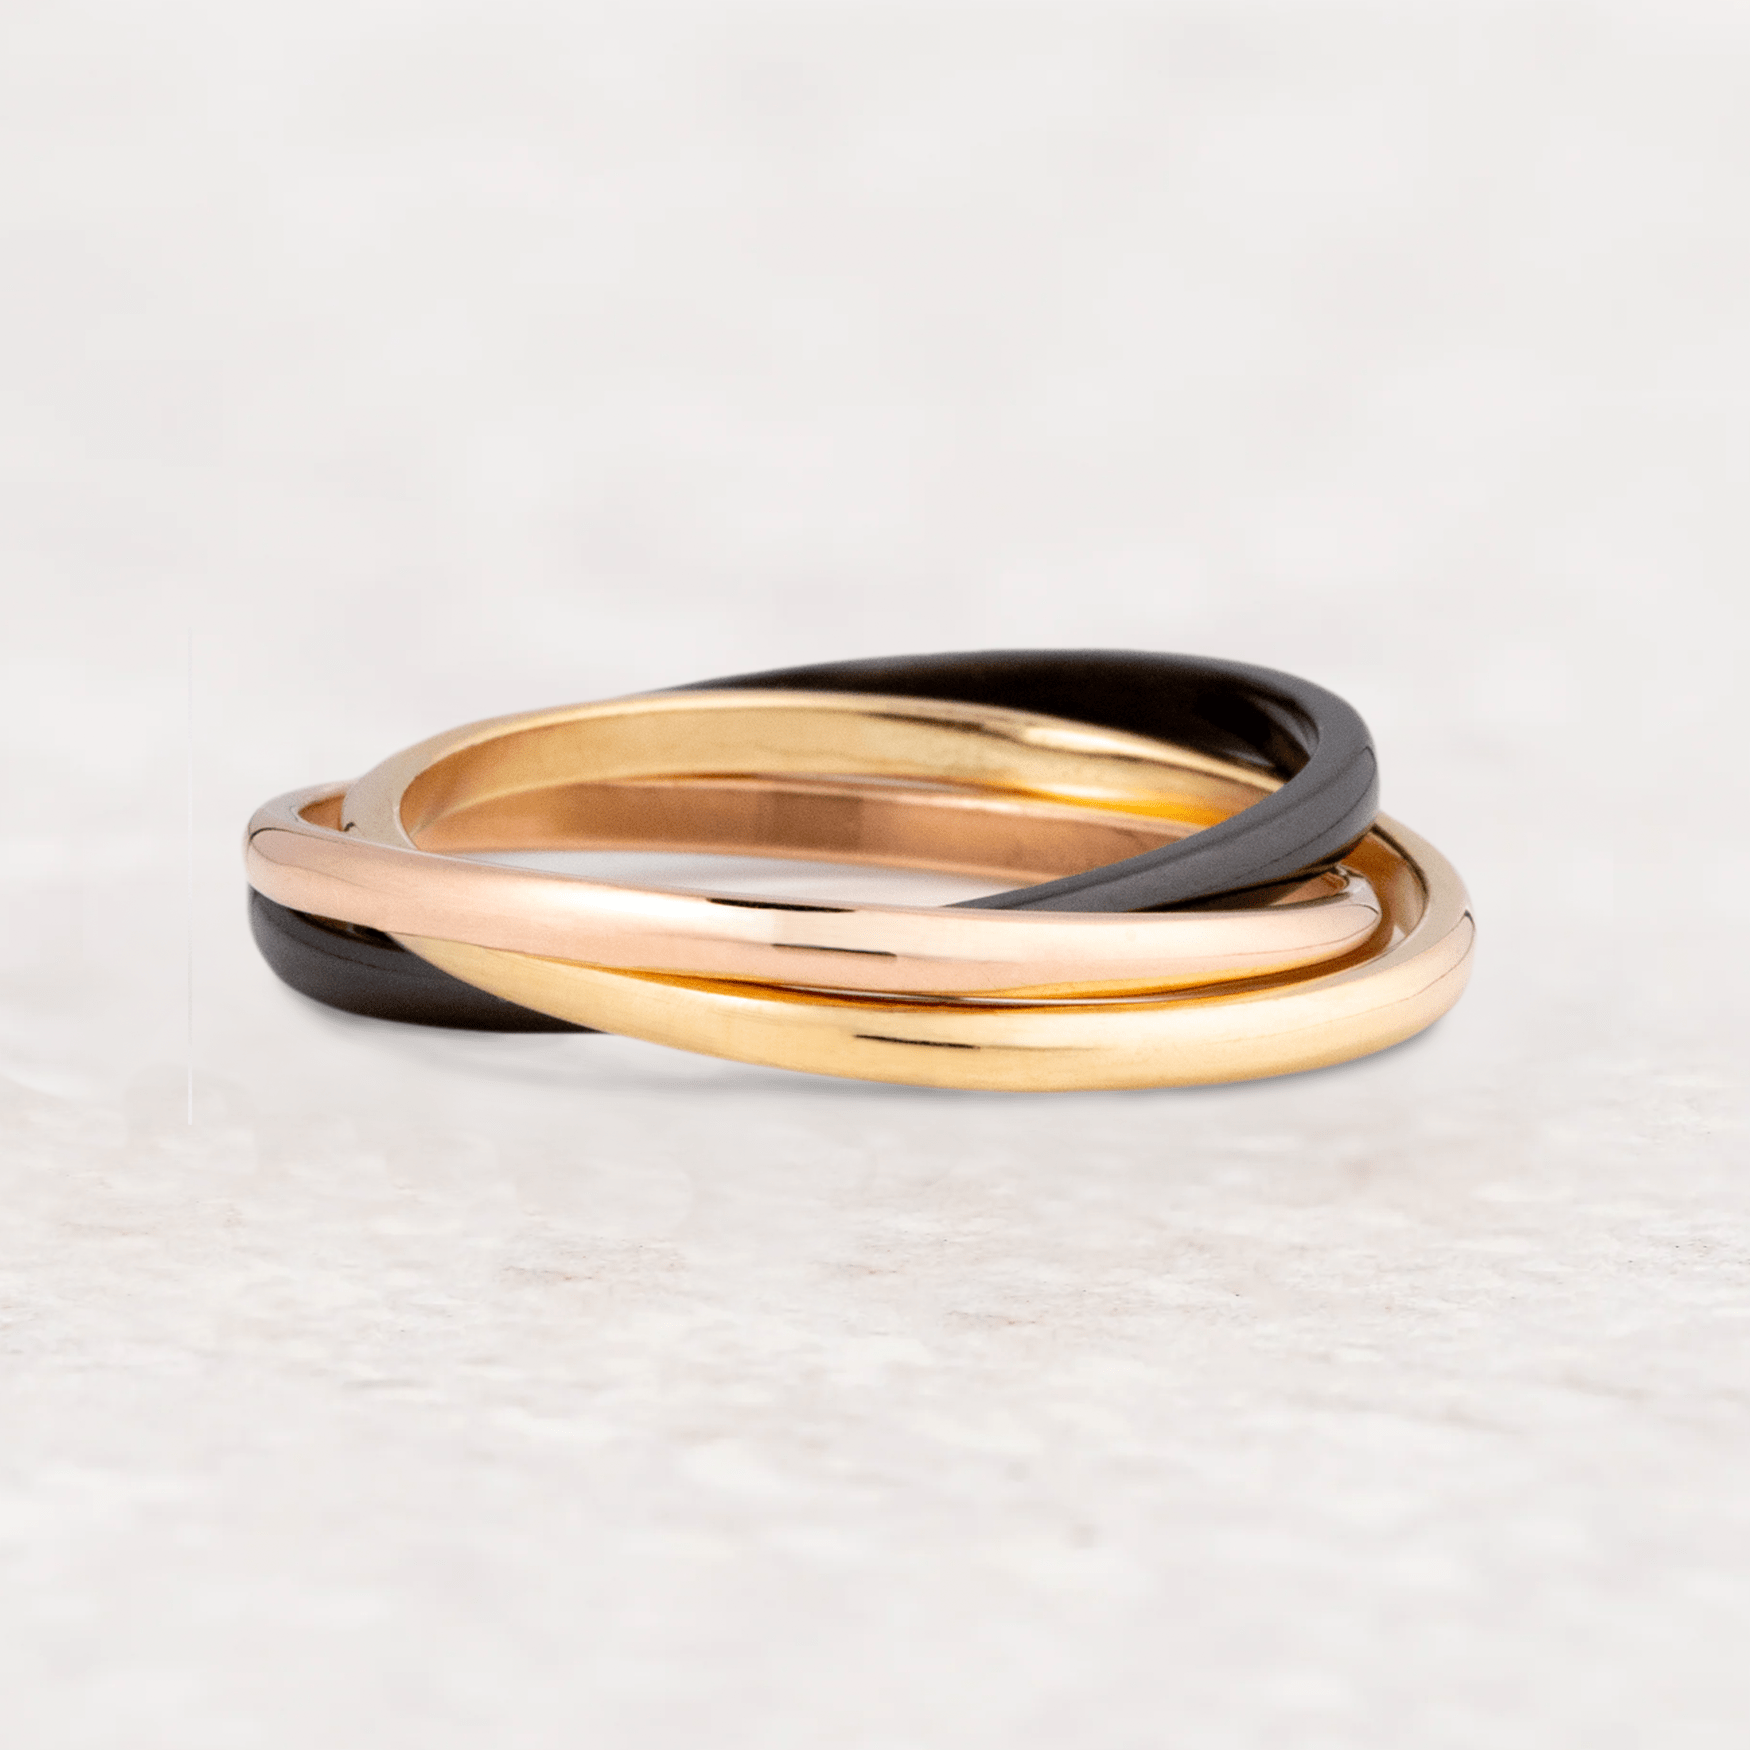 The Cosette | Unique Wedding Bands by Manly Bands